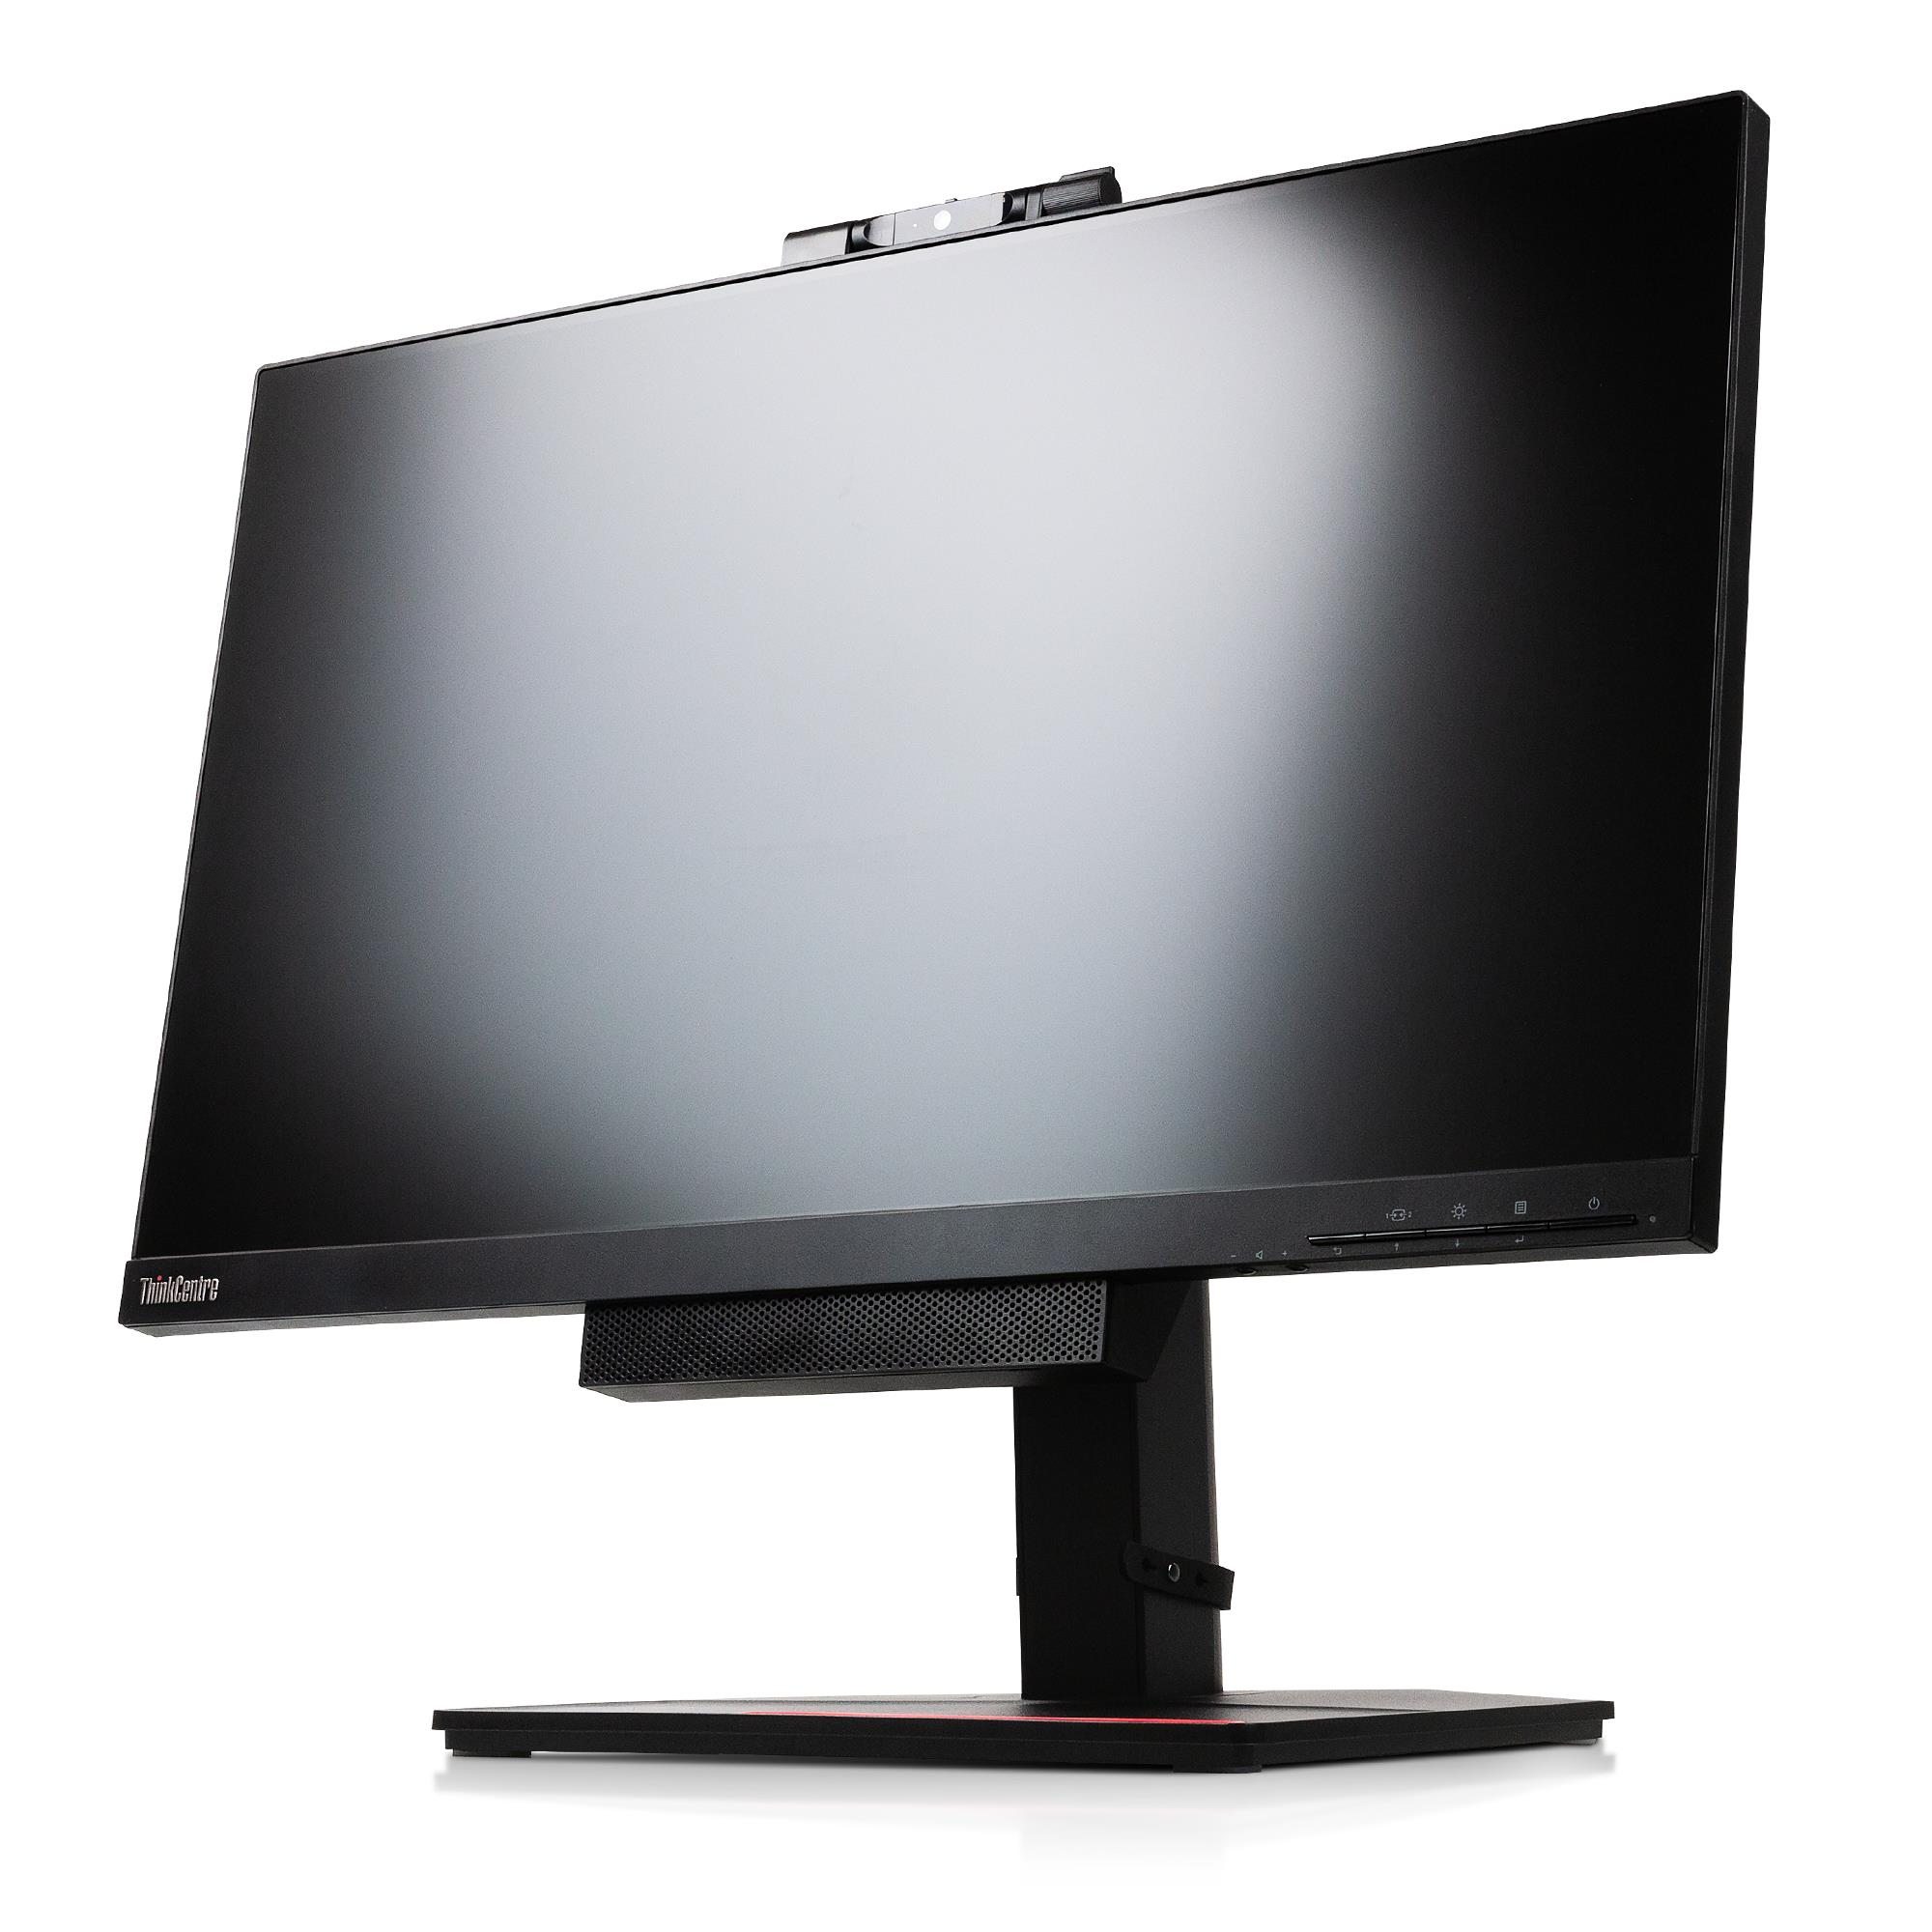 LENOVO REFURBISHED (*) ThinkCentre 23,80 Reaktionszeit Zoll ) Full-HD (14 TFT-Monitor ms Gen4 Tiny-in-One 24